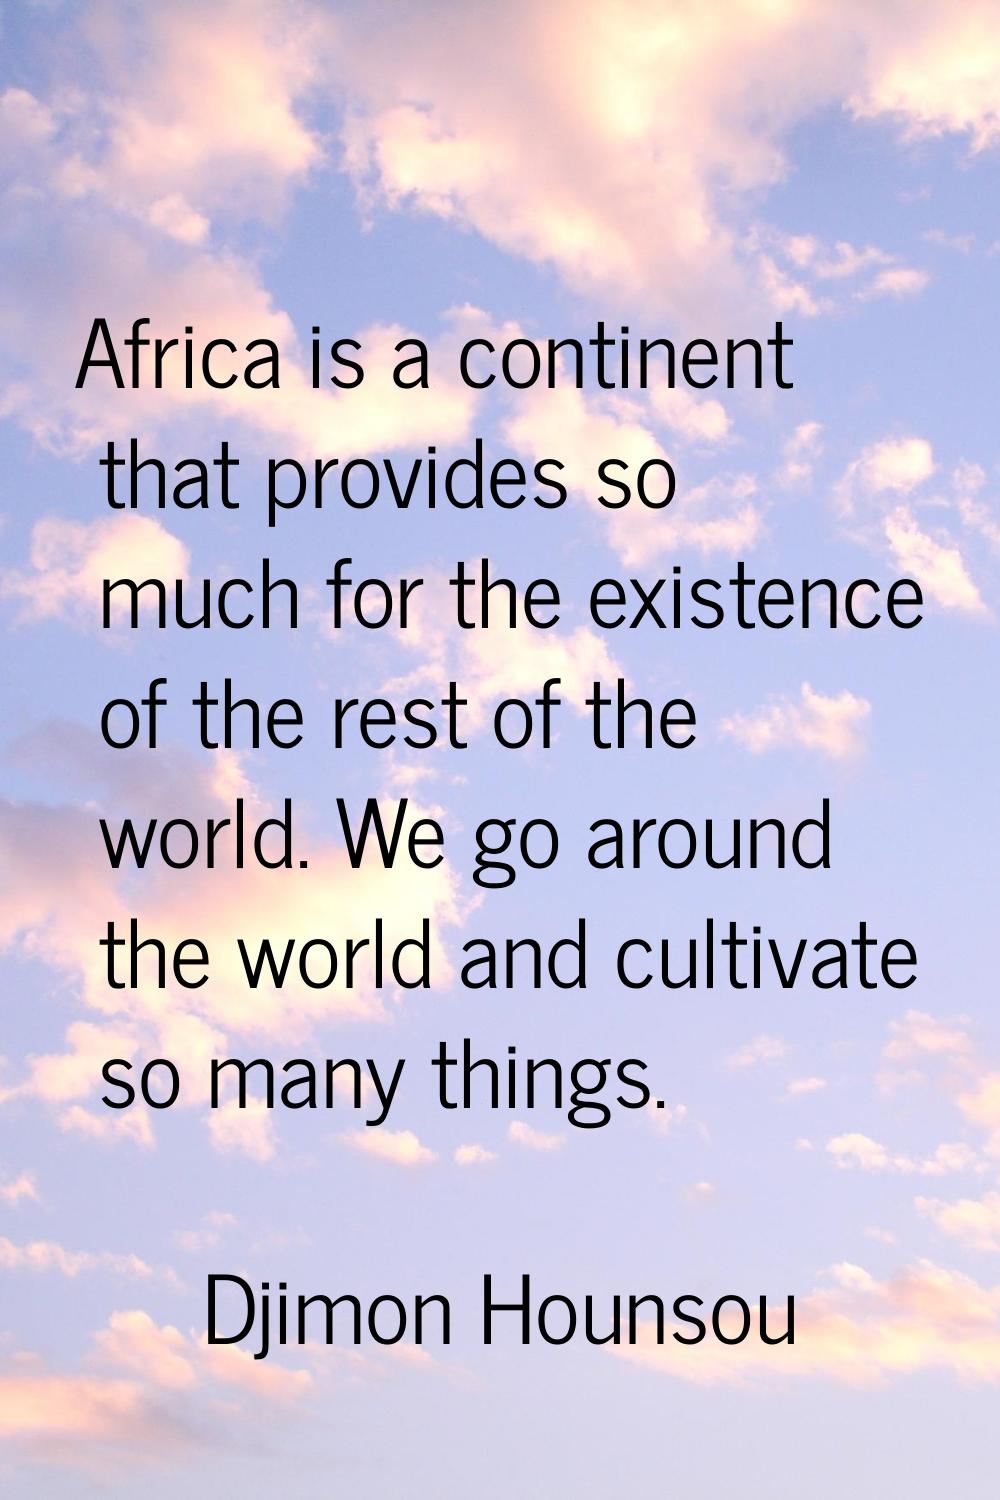 Africa is a continent that provides so much for the existence of the rest of the world. We go aroun